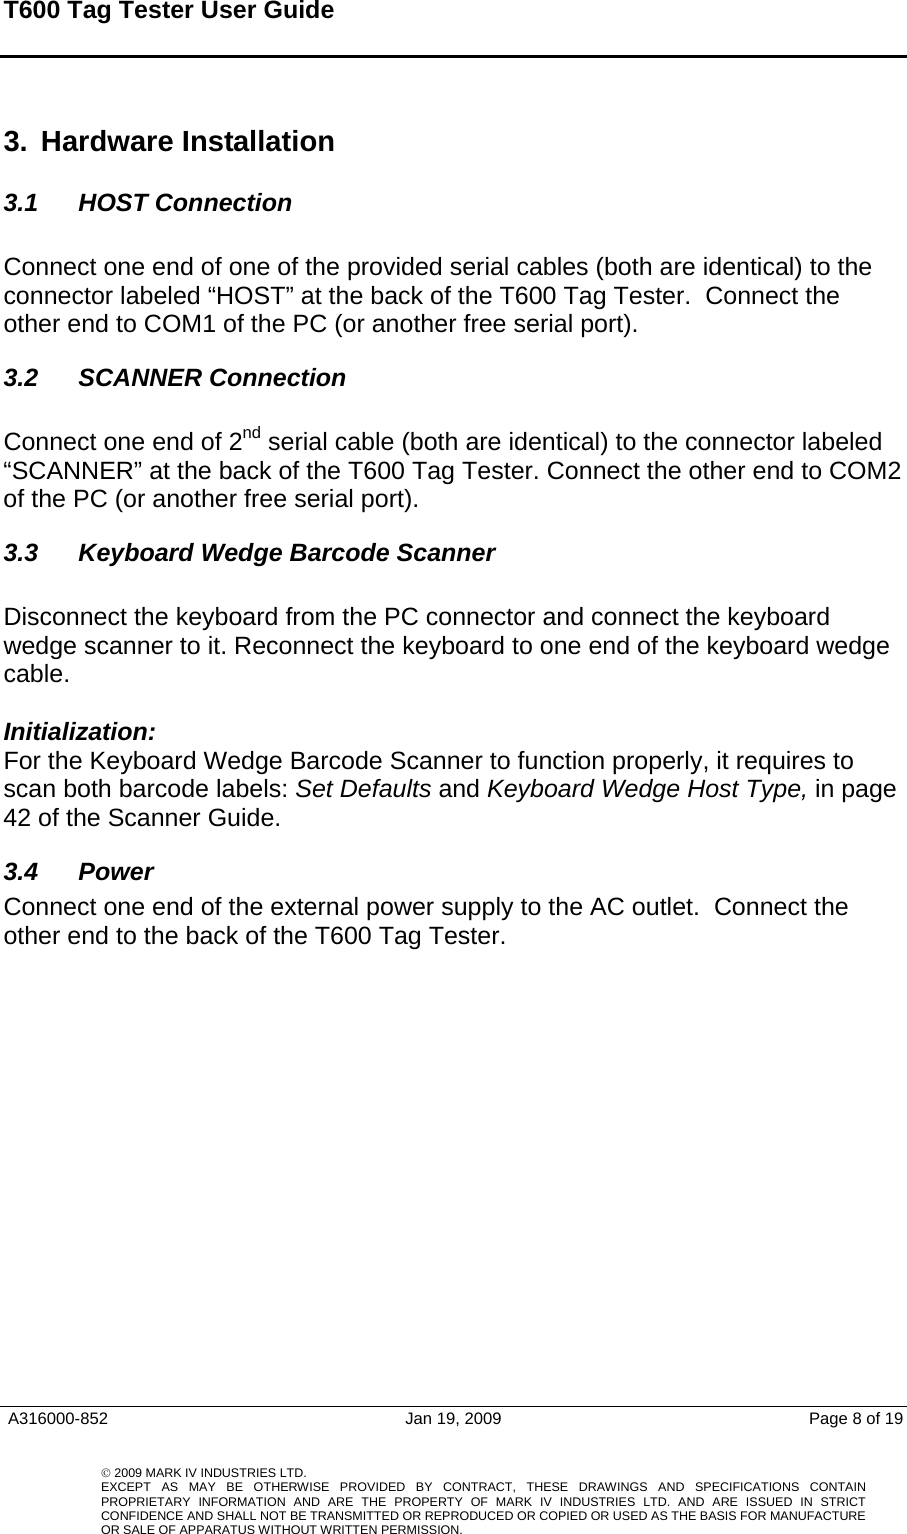 T600 Tag Tester User Guide     A316000-852  Jan 19, 2009  Page 8 of 19    © 2009 MARK IV INDUSTRIES LTD. EXCEPT AS MAY BE OTHERWISE PROVIDED BY CONTRACT, THESE DRAWINGS AND SPECIFICATIONS CONTAINPROPRIETARY INFORMATION AND ARE THE PROPERTY OF MARK IV INDUSTRIES LTD. AND ARE ISSUED IN STRICT CONFIDENCE AND SHALL NOT BE TRANSMITTED OR REPRODUCED OR COPIED OR USED AS THE BASIS FOR MANUFACTUREOR SALE OF APPARATUS WITHOUT WRITTEN PERMISSION. 3.  Hardware Installation  3.1 HOST Connection  Connect one end of one of the provided serial cables (both are identical) to the connector labeled “HOST” at the back of the T600 Tag Tester.  Connect the other end to COM1 of the PC (or another free serial port).  3.2  SCANNER Connection   Connect one end of 2nd serial cable (both are identical) to the connector labeled “SCANNER” at the back of the T600 Tag Tester. Connect the other end to COM2 of the PC (or another free serial port). 3.3  Keyboard Wedge Barcode Scanner  Disconnect the keyboard from the PC connector and connect the keyboard wedge scanner to it. Reconnect the keyboard to one end of the keyboard wedge cable.    Initialization: For the Keyboard Wedge Barcode Scanner to function properly, it requires to scan both barcode labels: Set Defaults and Keyboard Wedge Host Type, in page 42 of the Scanner Guide. 3.4 Power Connect one end of the external power supply to the AC outlet.  Connect the other end to the back of the T600 Tag Tester.     